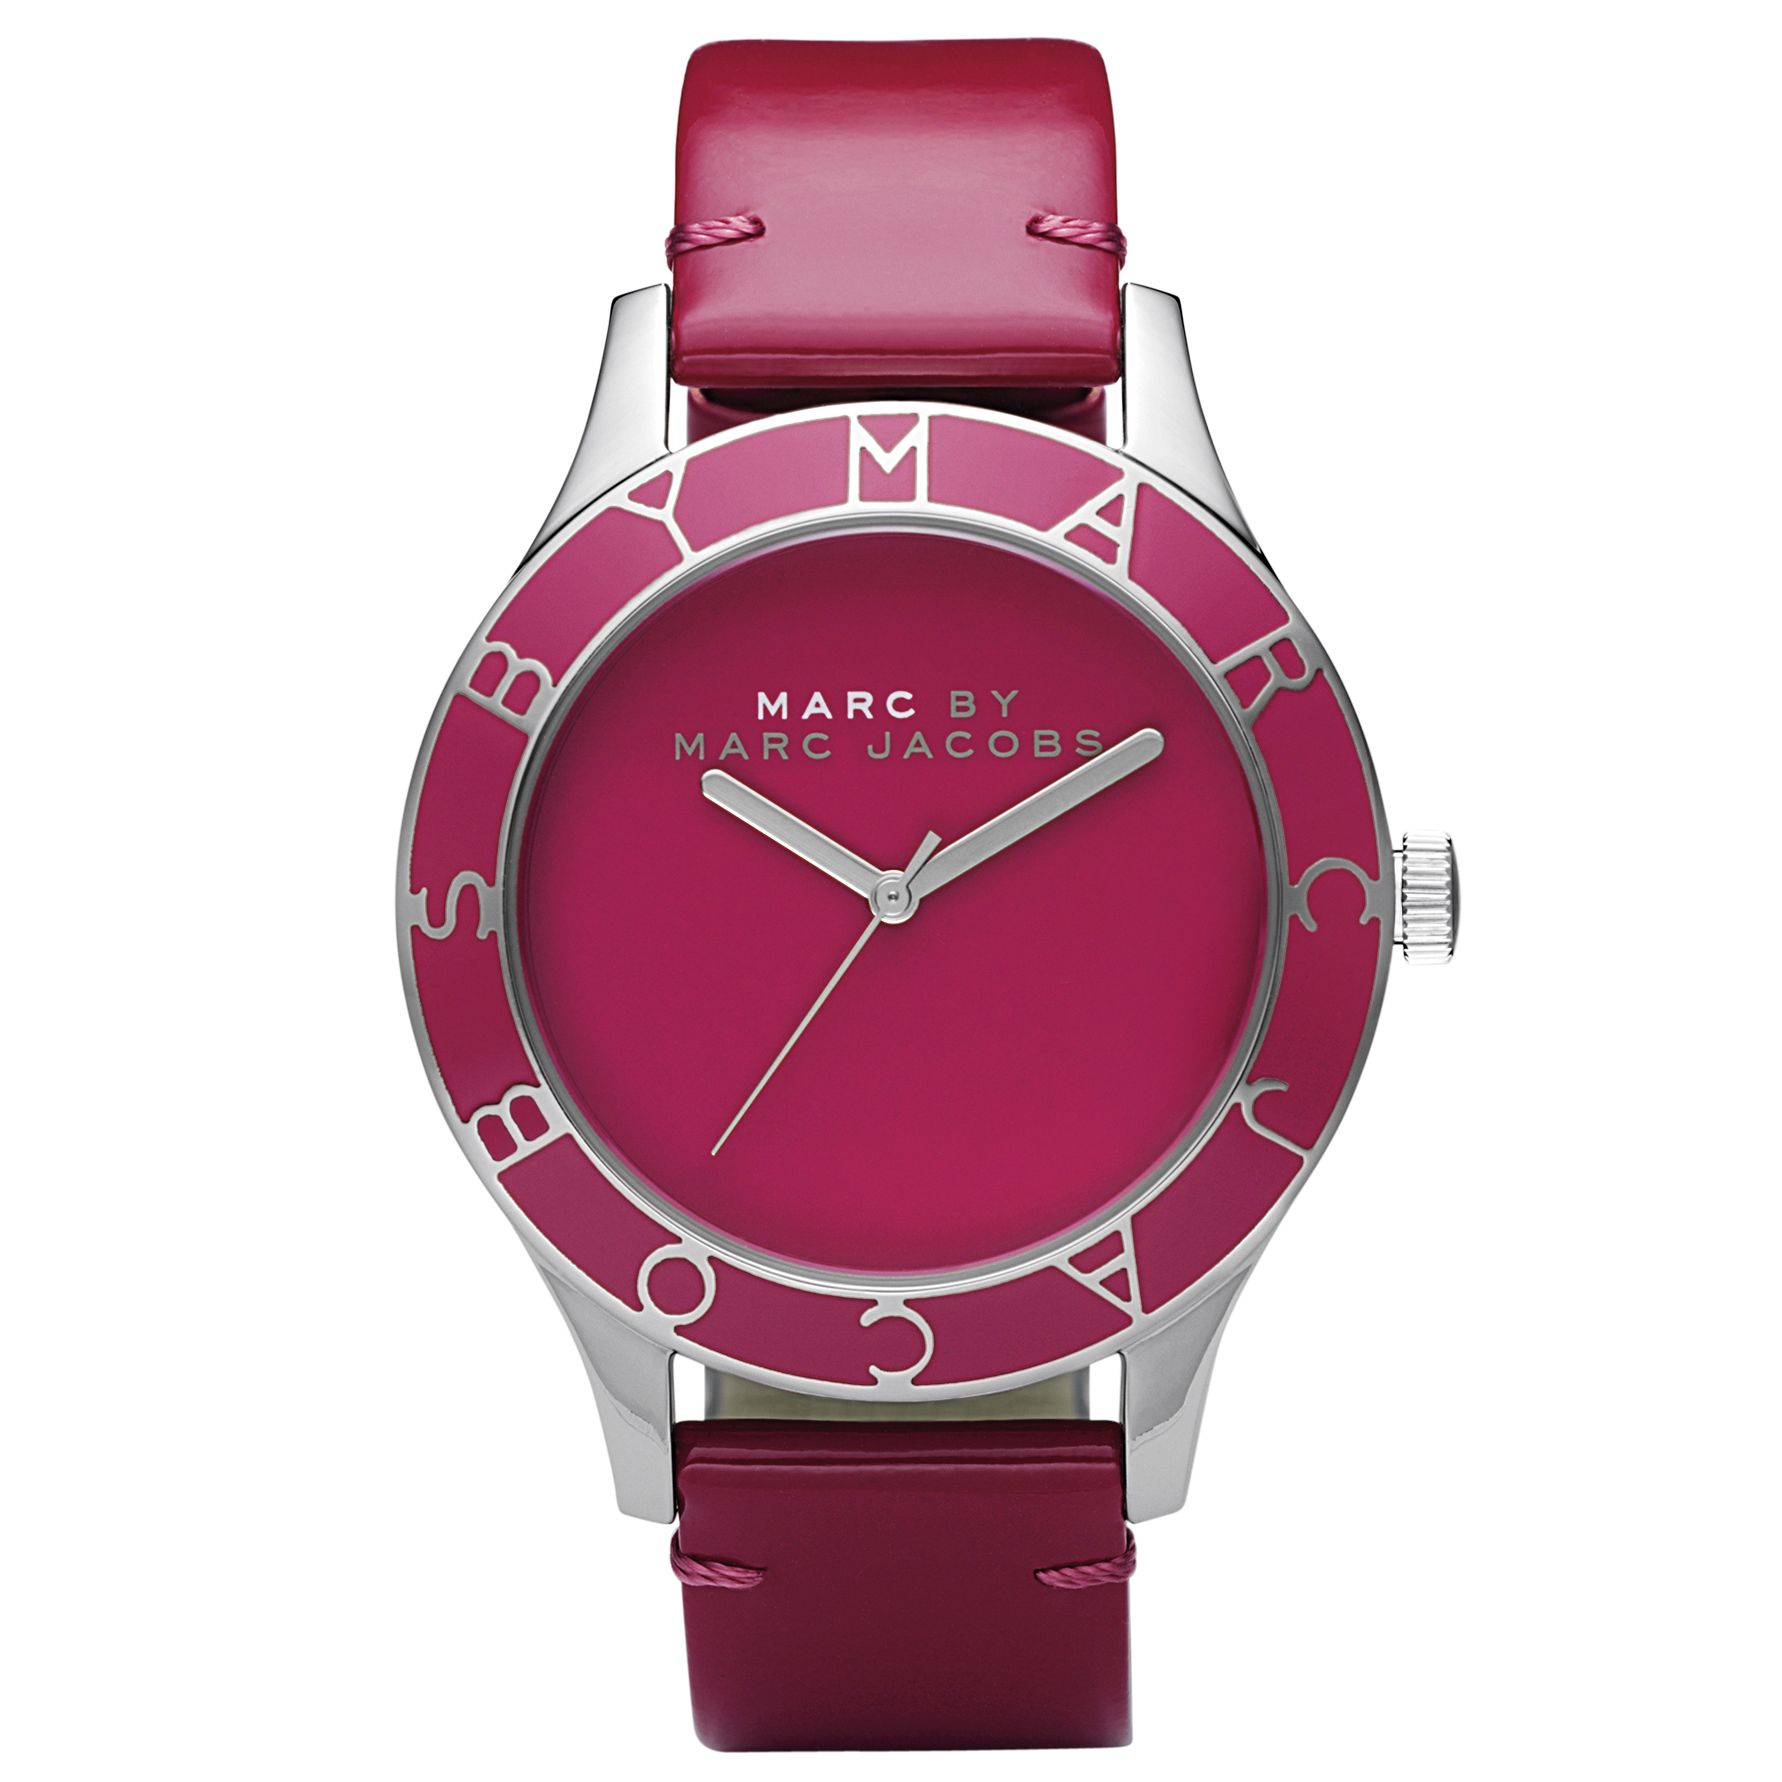 Marc by Marc Jacobs MBM1167 Women's Large Blade Round Dial Red Leather Strap Watch at John Lewis